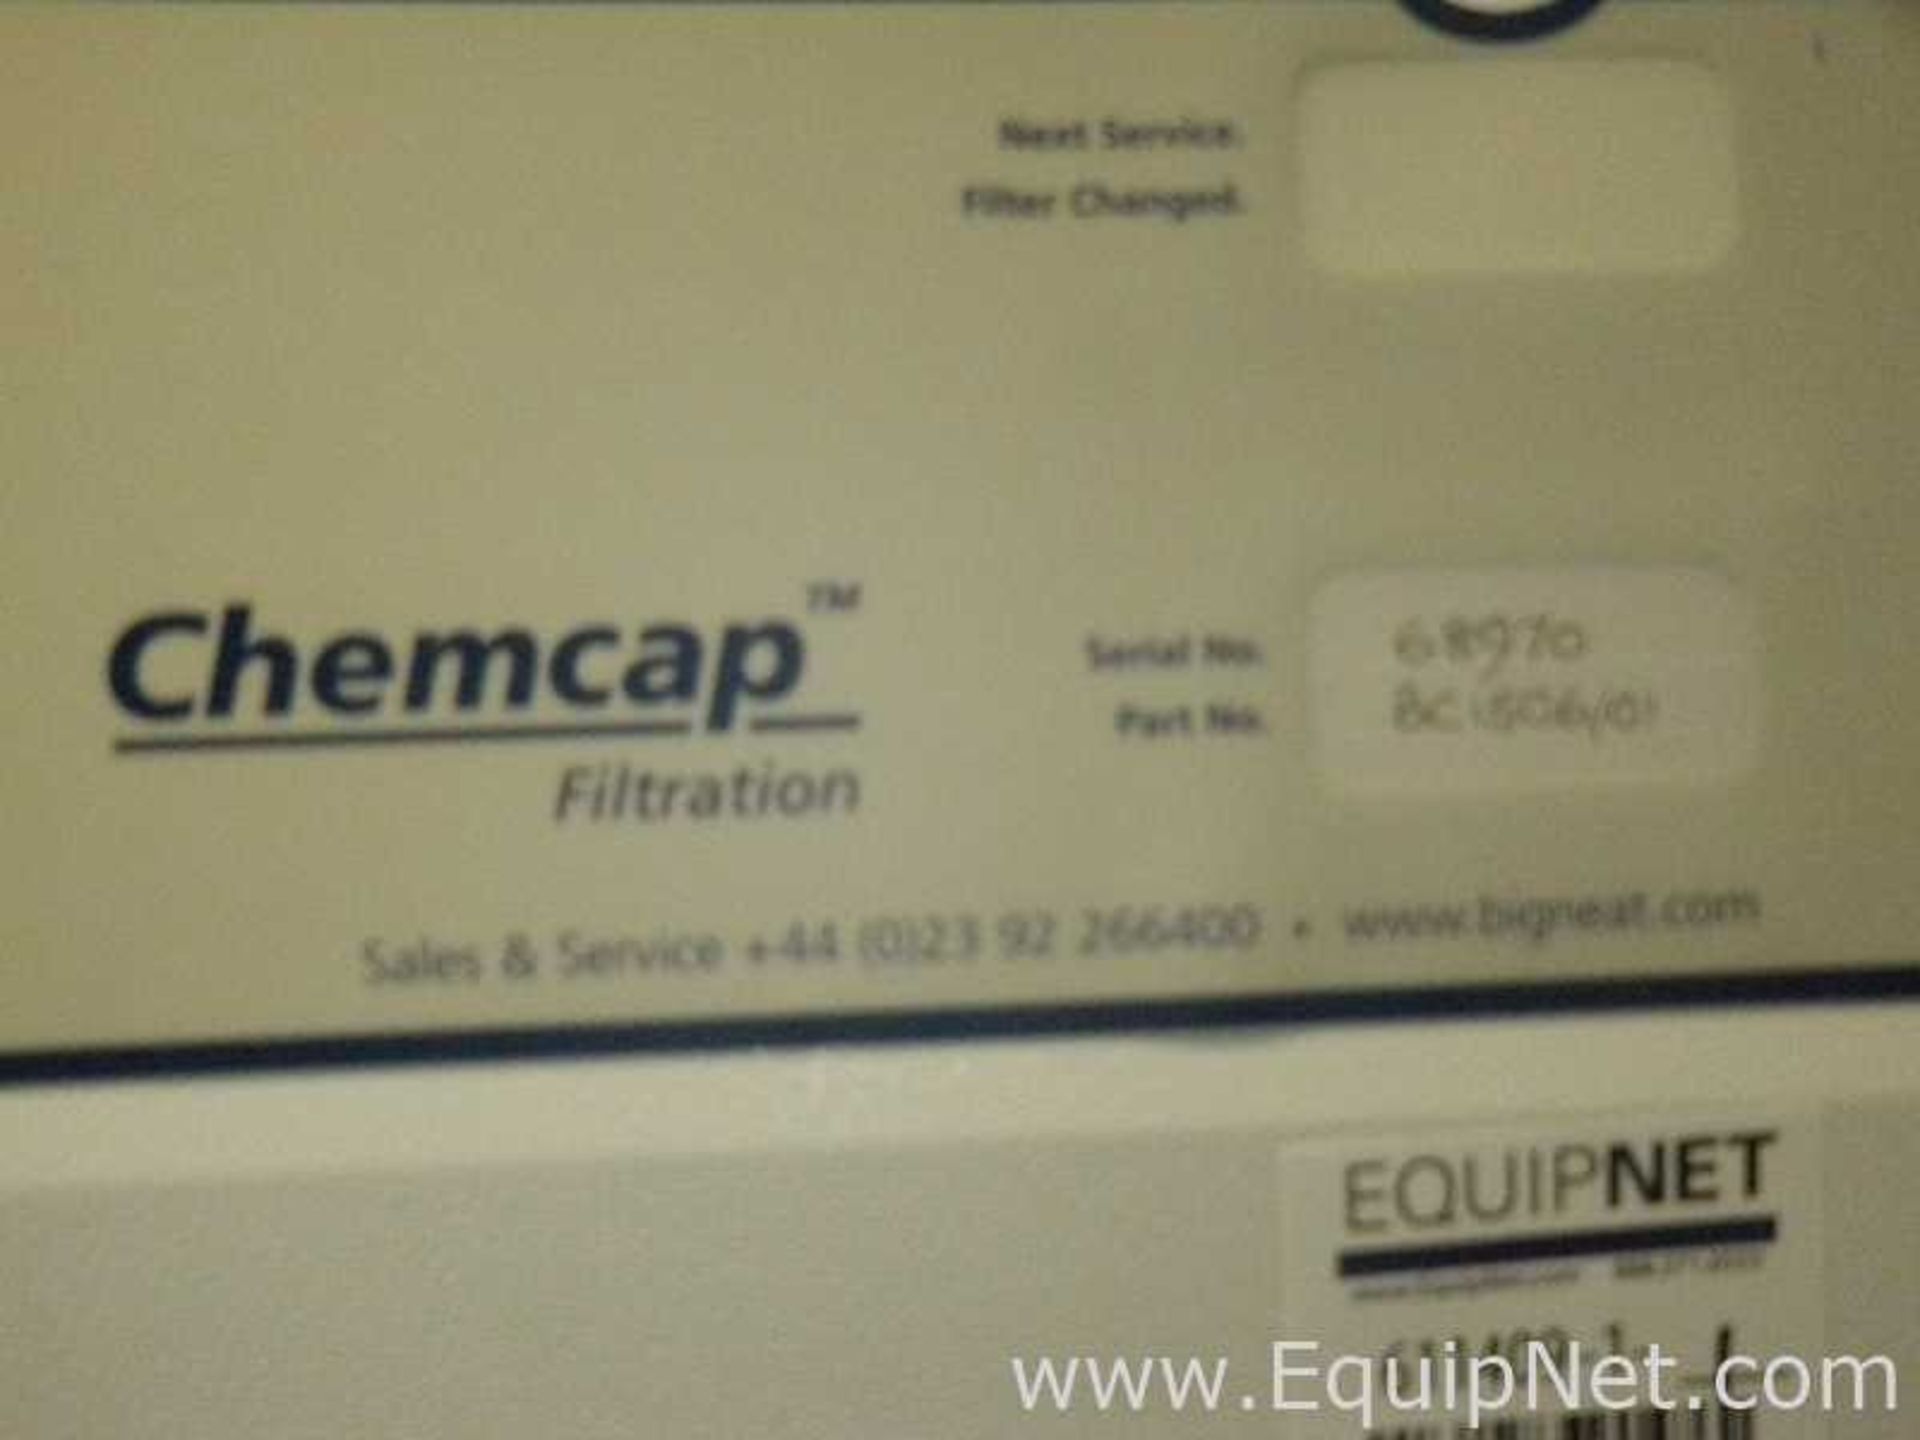 BigNeat Chemcap Biological Bench Top Safety Cabinet - Image 3 of 5